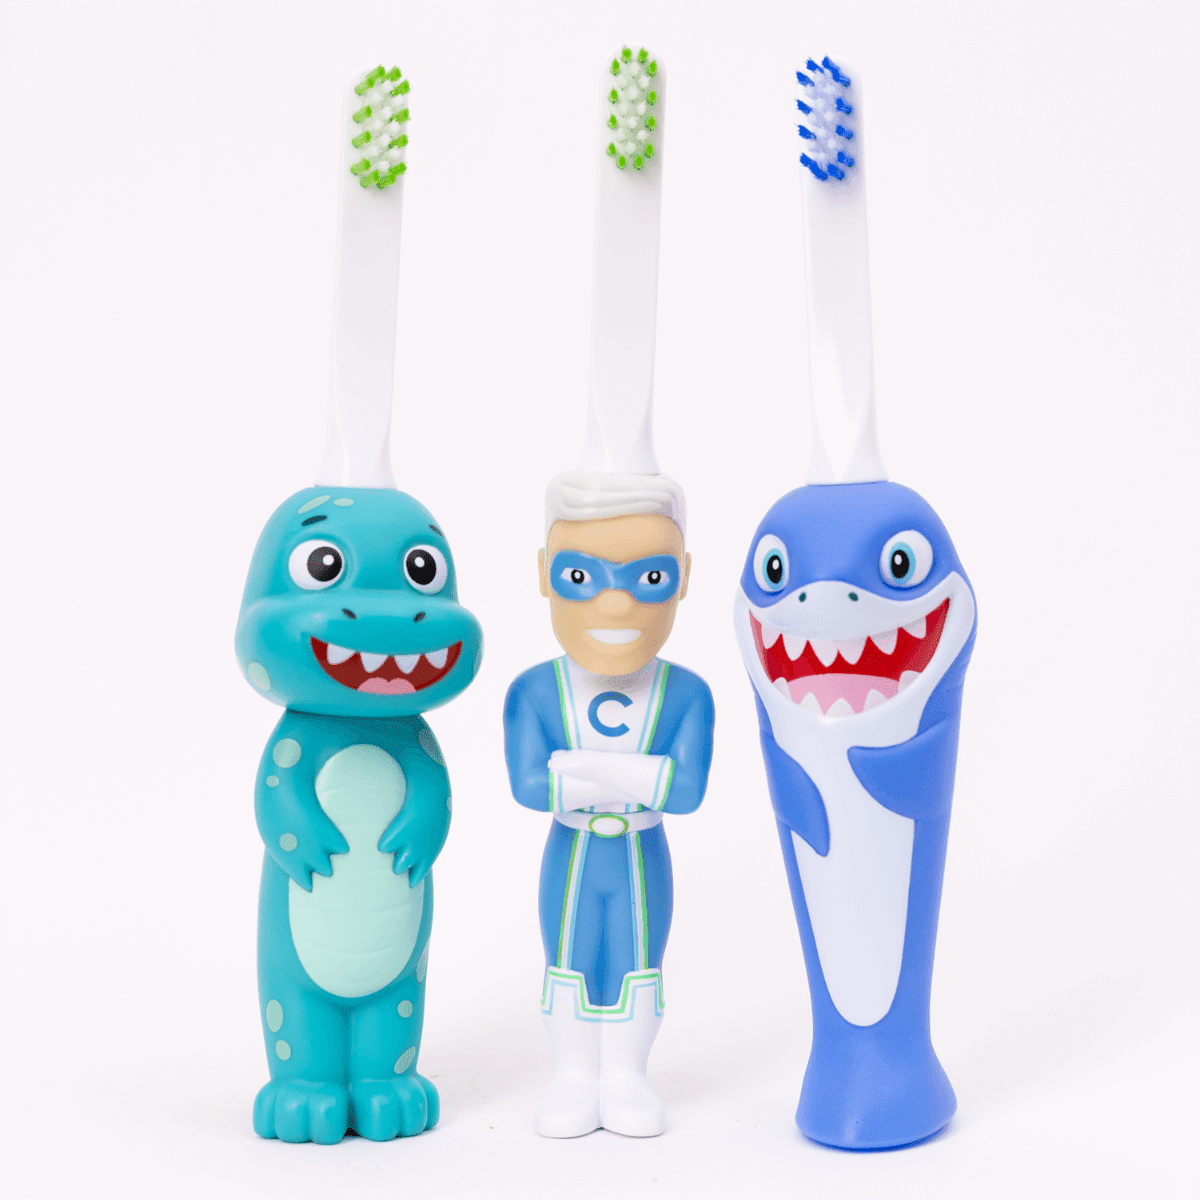 Set of three toothbrushes with Captain Cavity and cartoonish designs